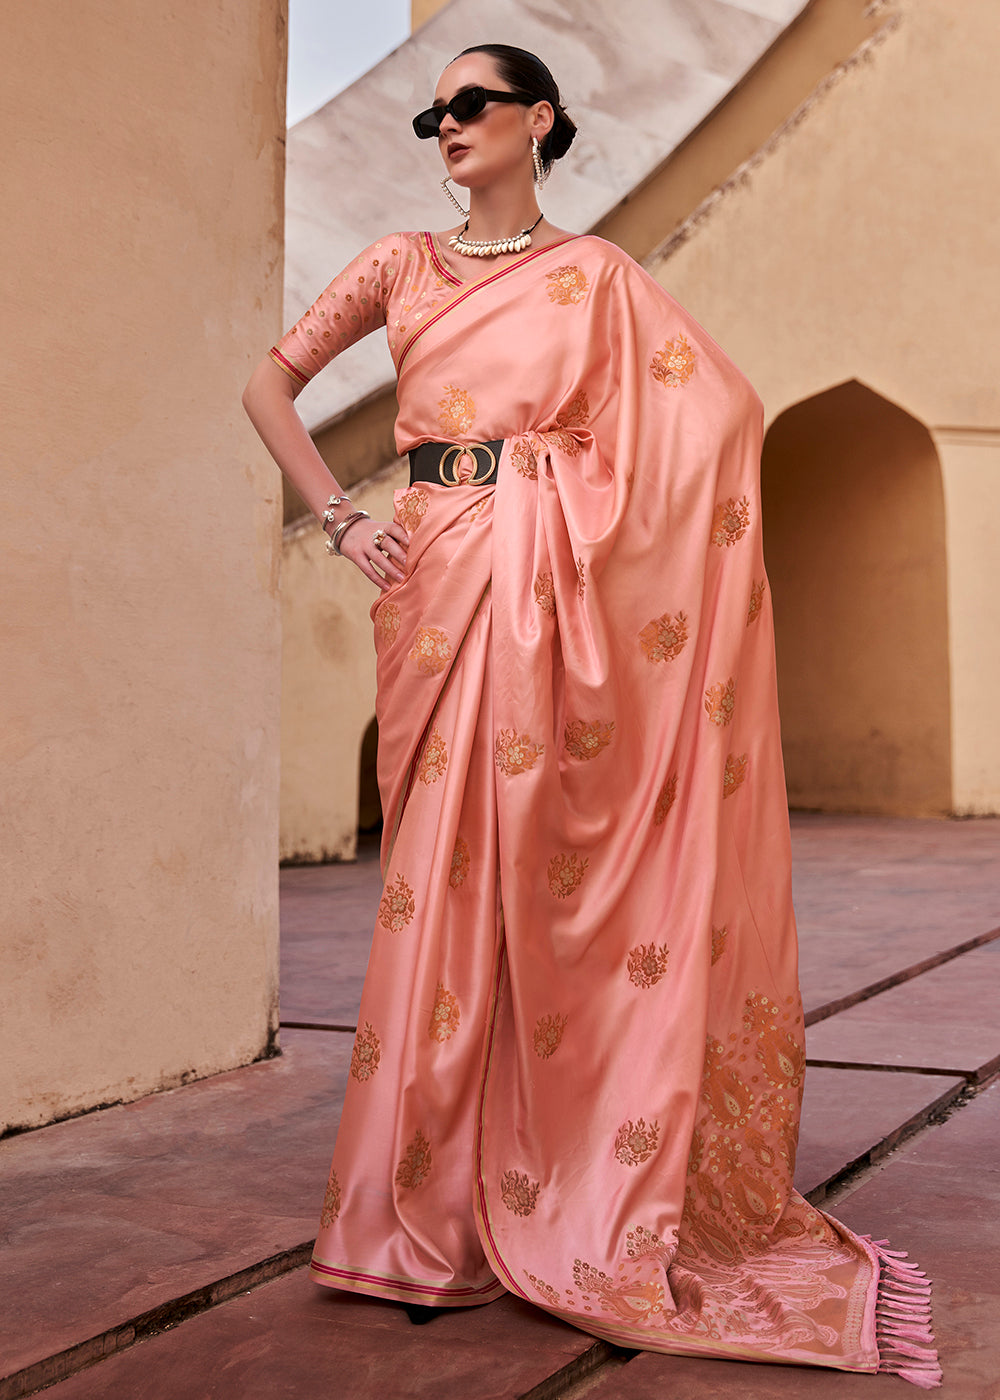 Buy Now Coral Pink Pure Satin Zari Weaving Wedding Festive Saree Online in USA, UK, Canada & Worldwide at Empress Clothing. 